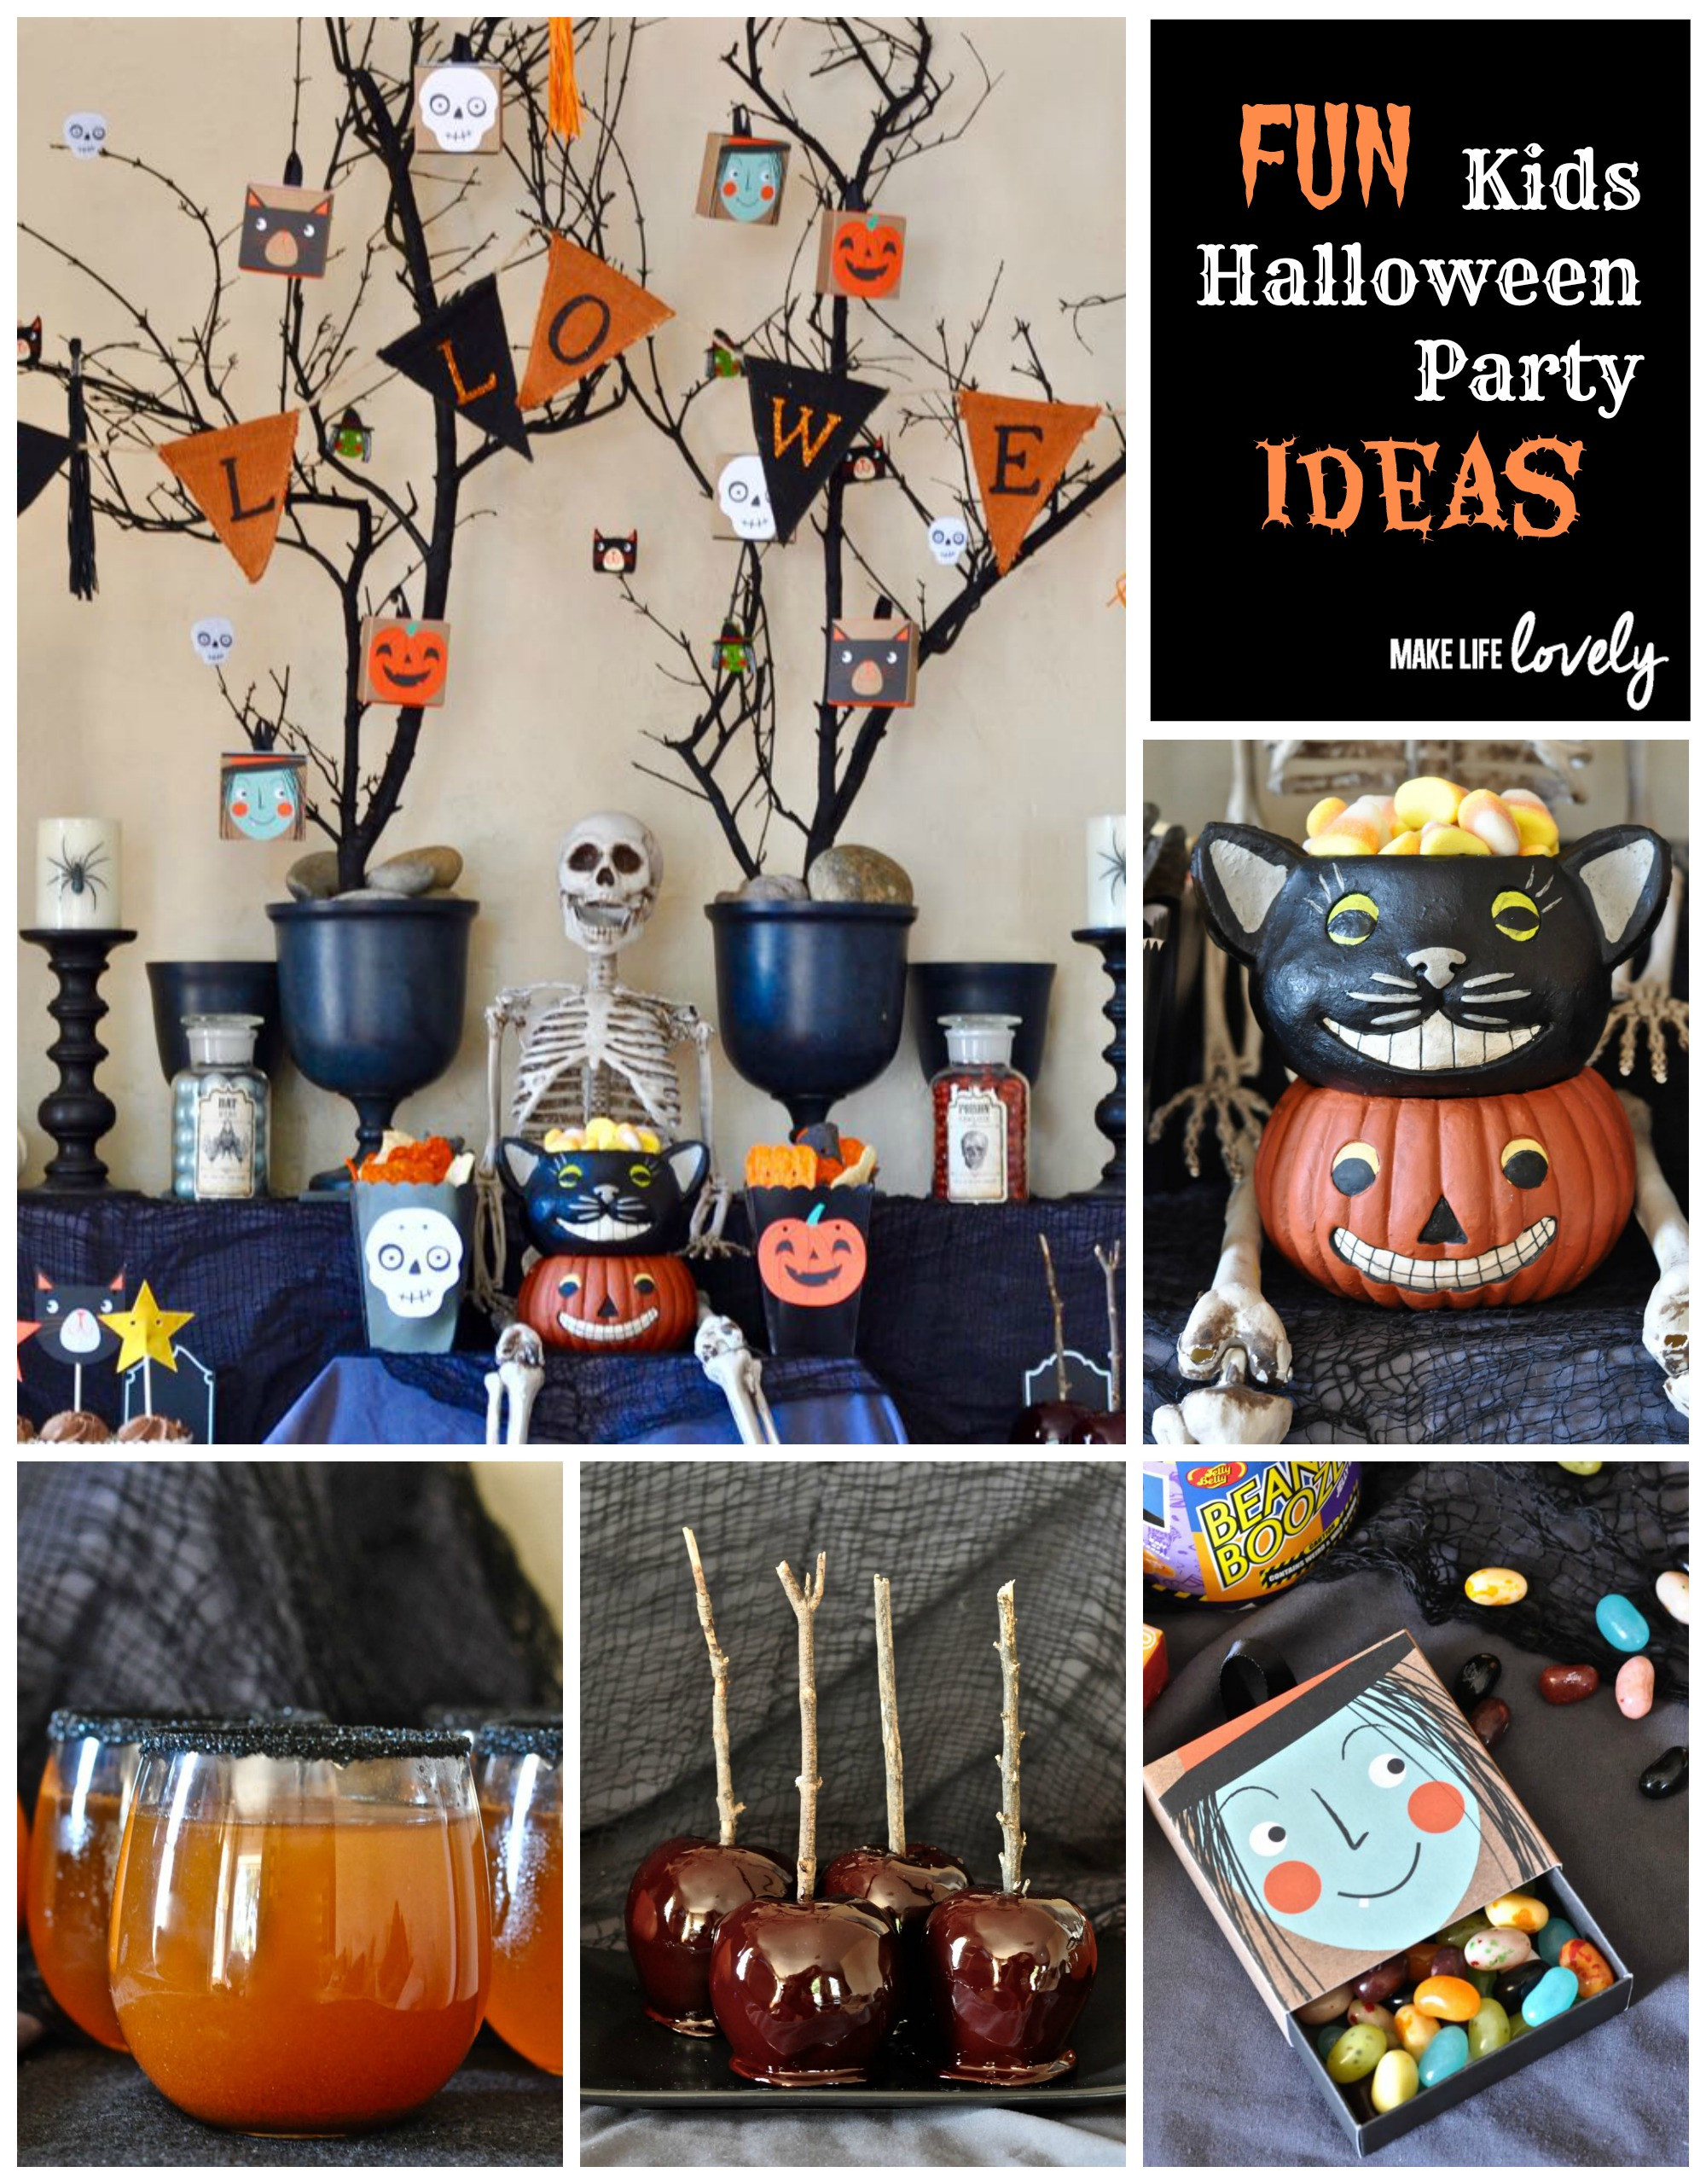 Halloween Party Idea For Kids
 kids Halloween party